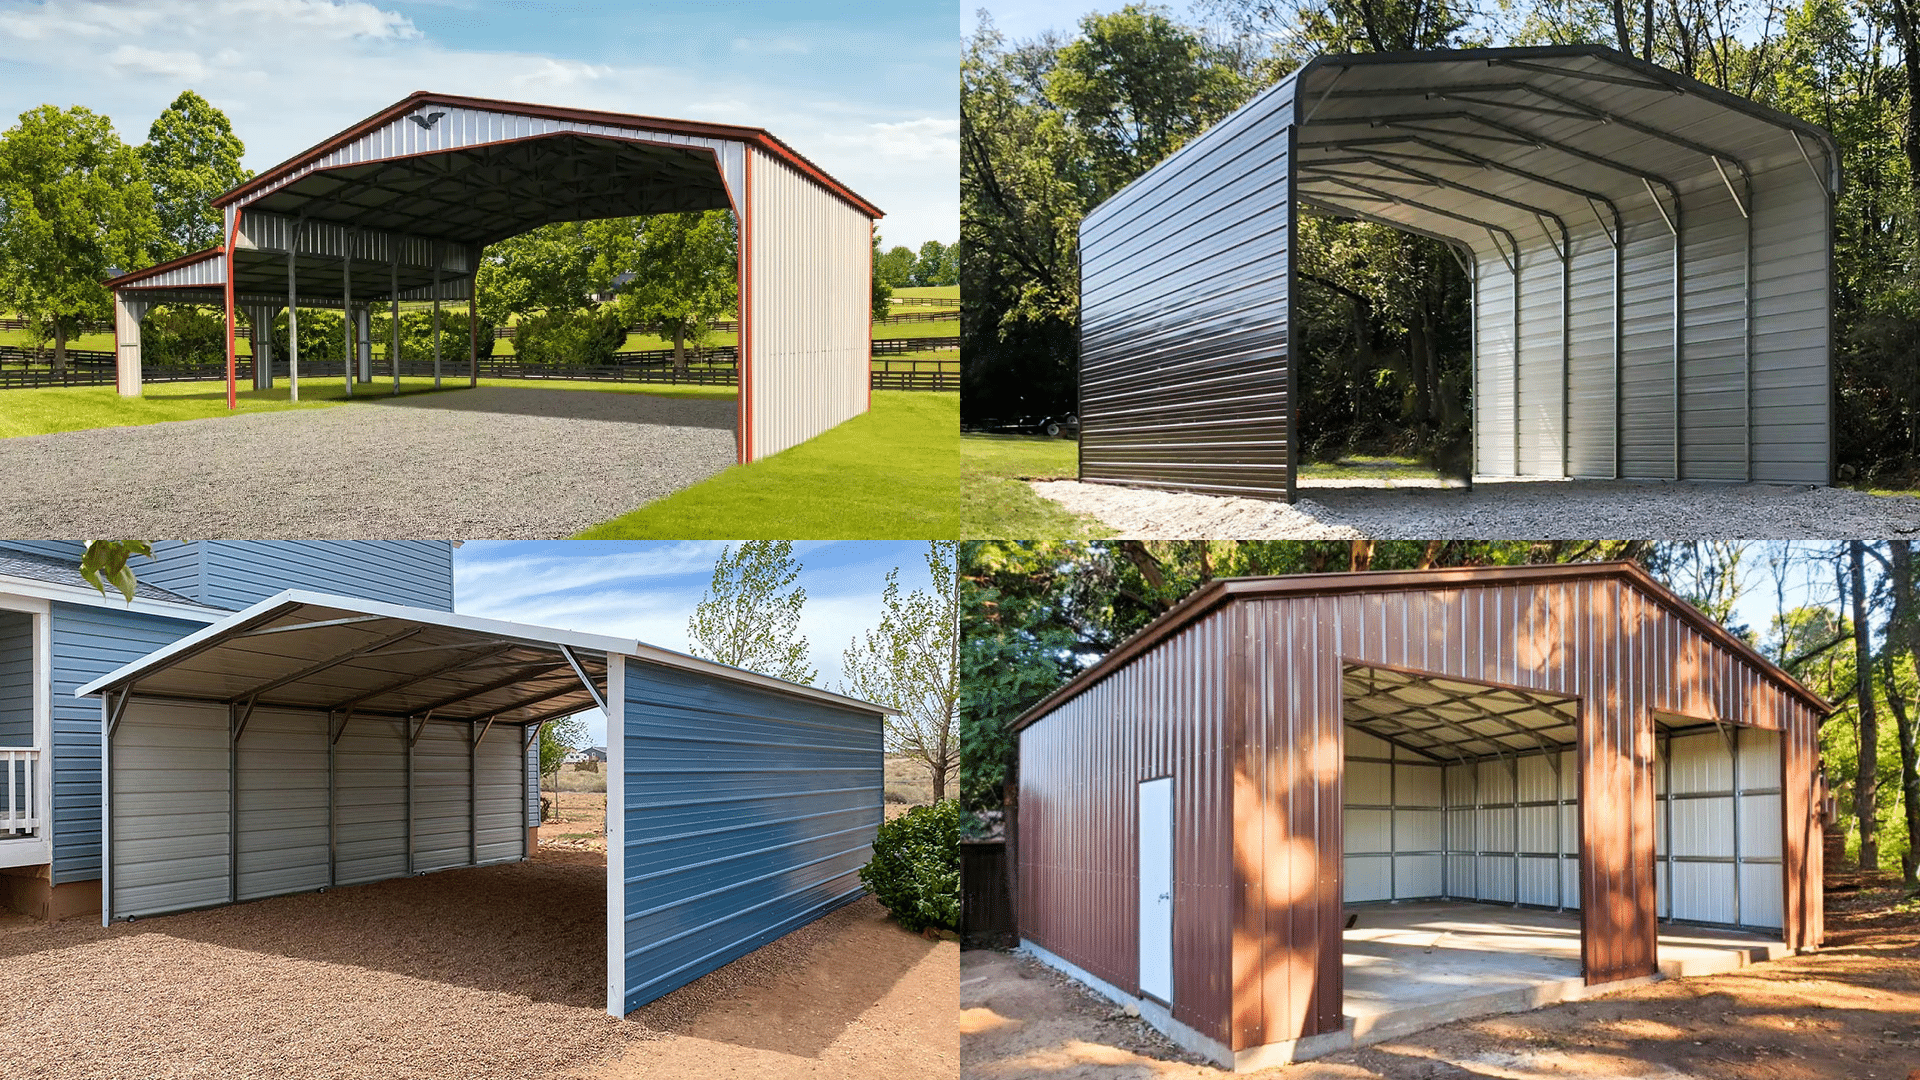 steel carport, pictures, outdoor, backyard, car storage, durable, long-lasting, weather-resistant, modern design, construction, driveway, vehicle protection, spacious, versatile, commercial, residential